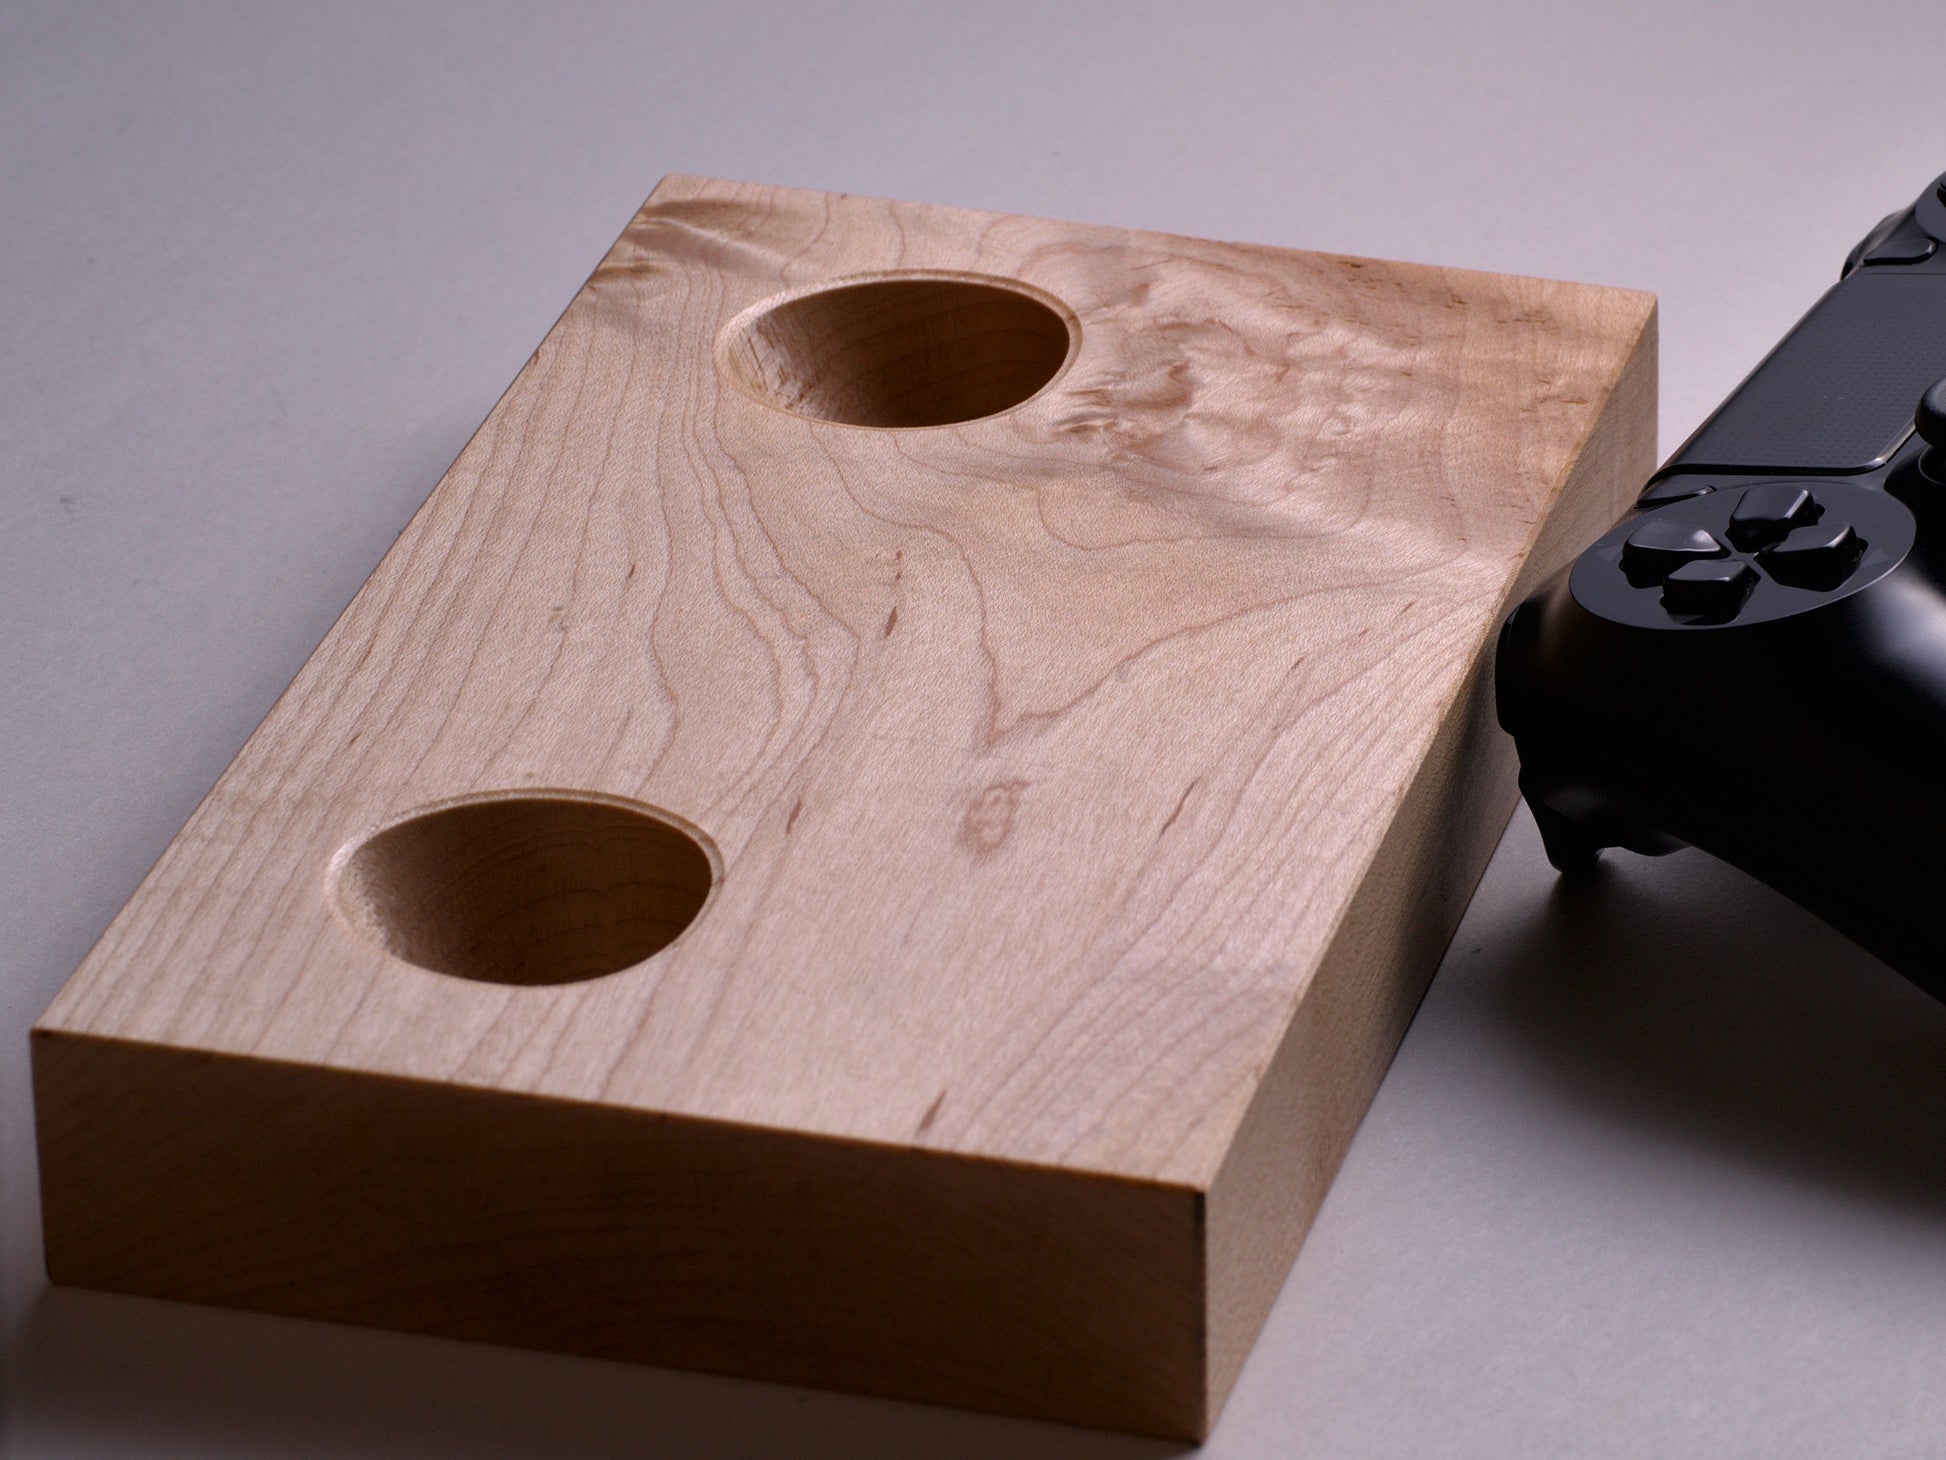 Wooden stand for Playstation 4 dualshock controller